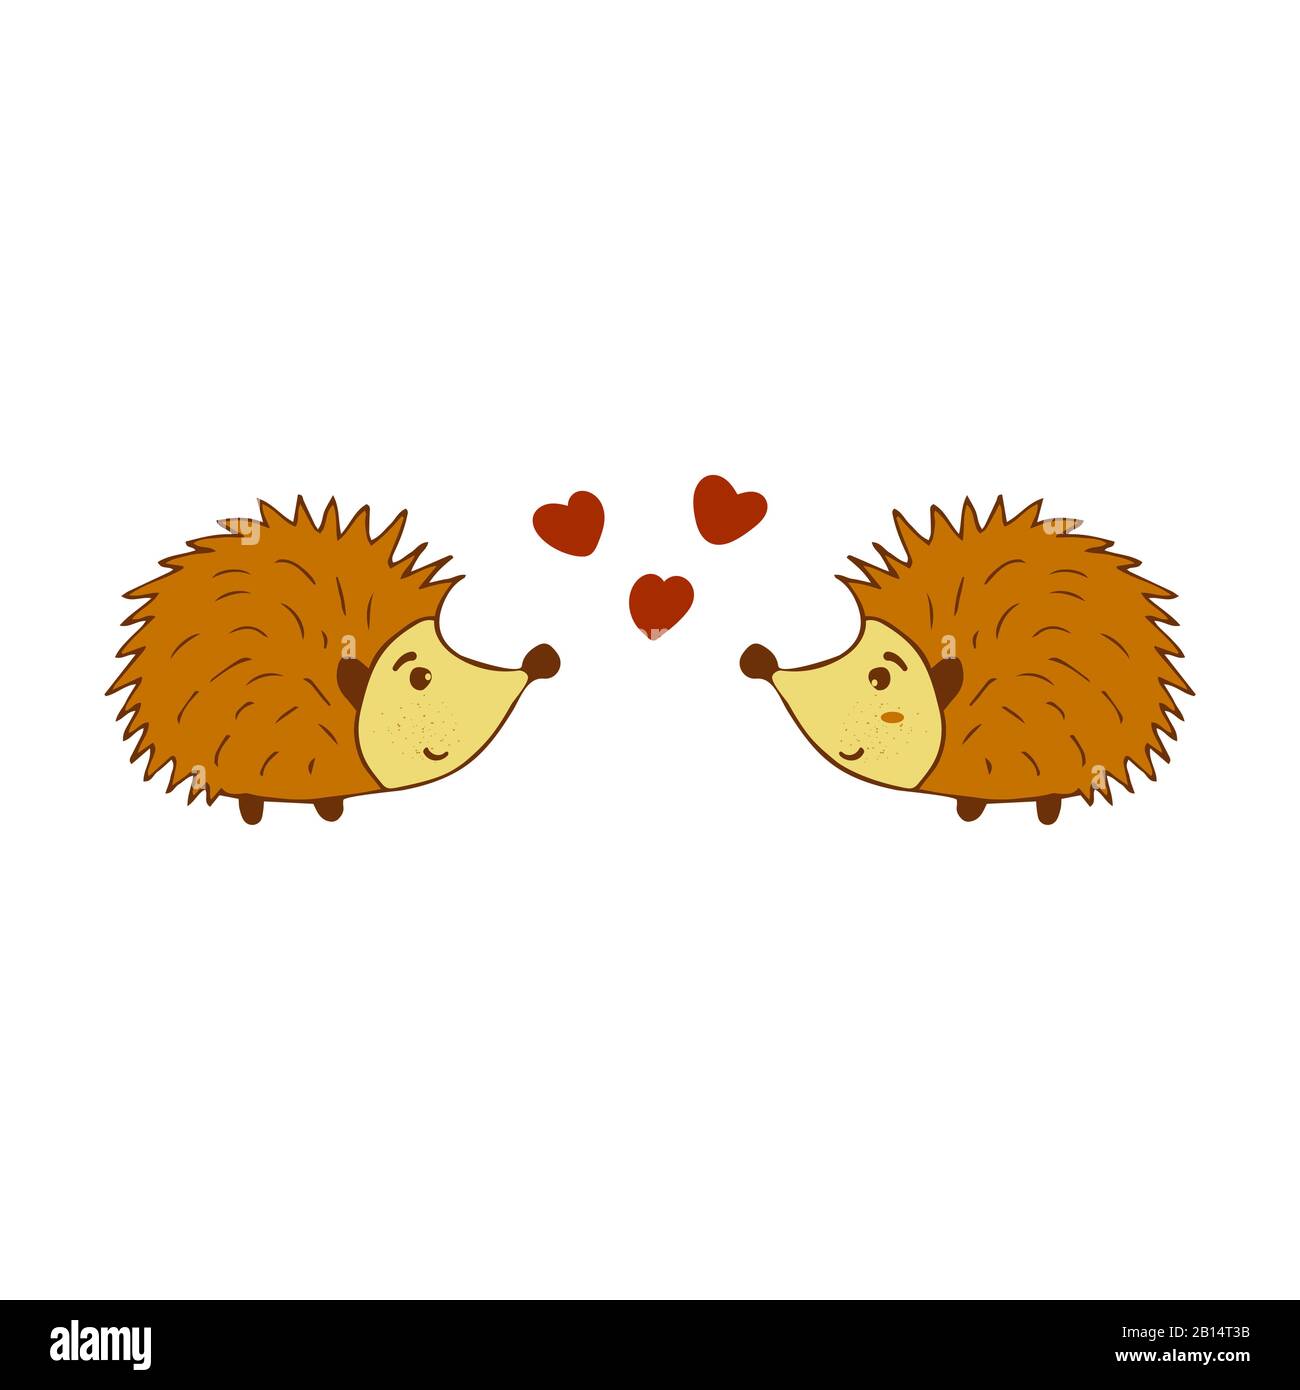 Two cute hedgehogs in love colorful illustration on a white background. Forest animal with prickly needles Stock Vector